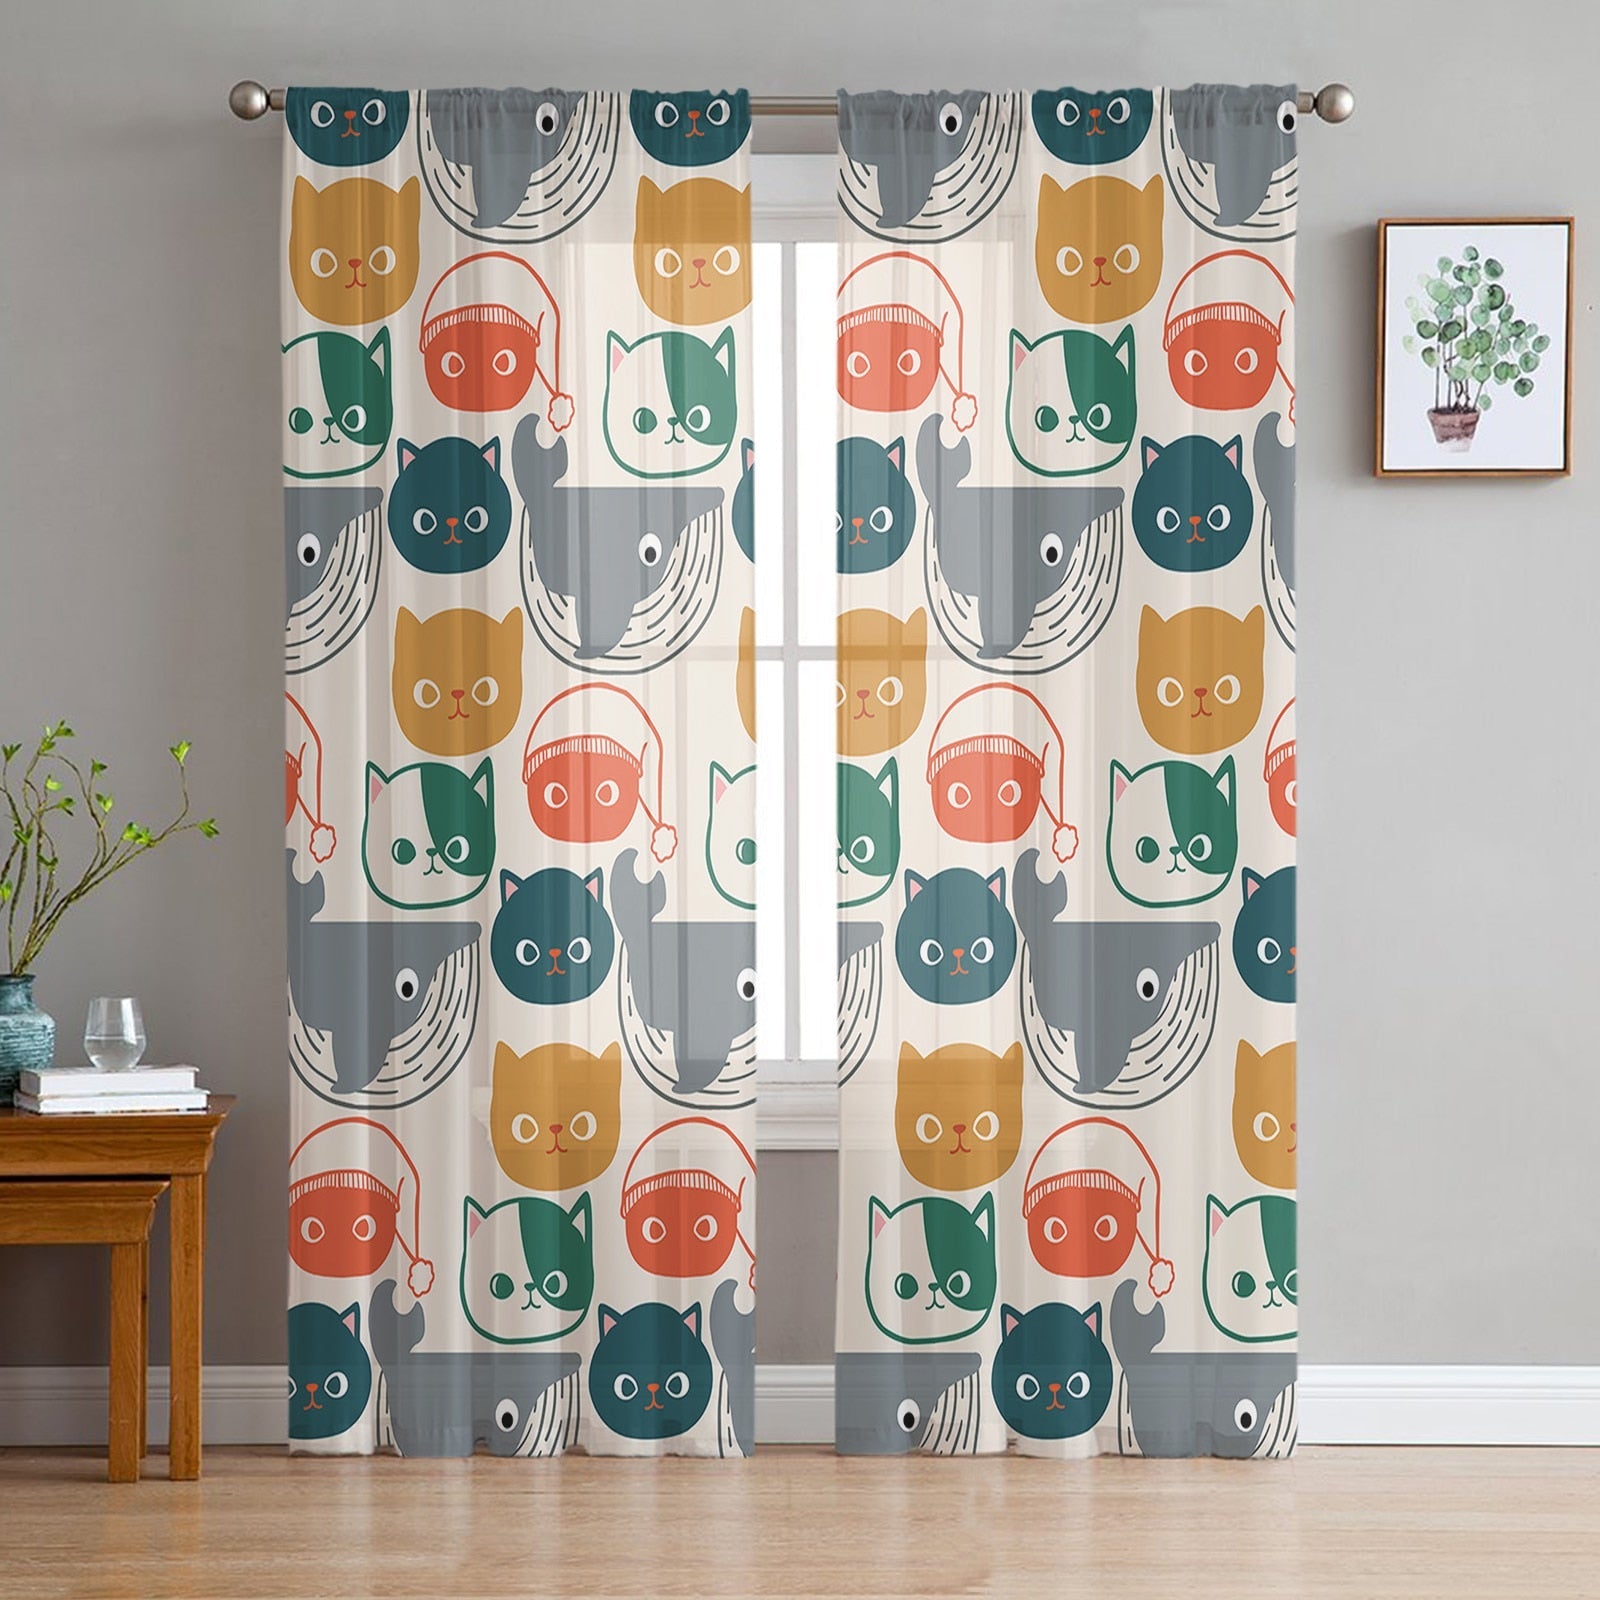 Cat Curtains for Bedroom - Green / W135 x H114cm - cat